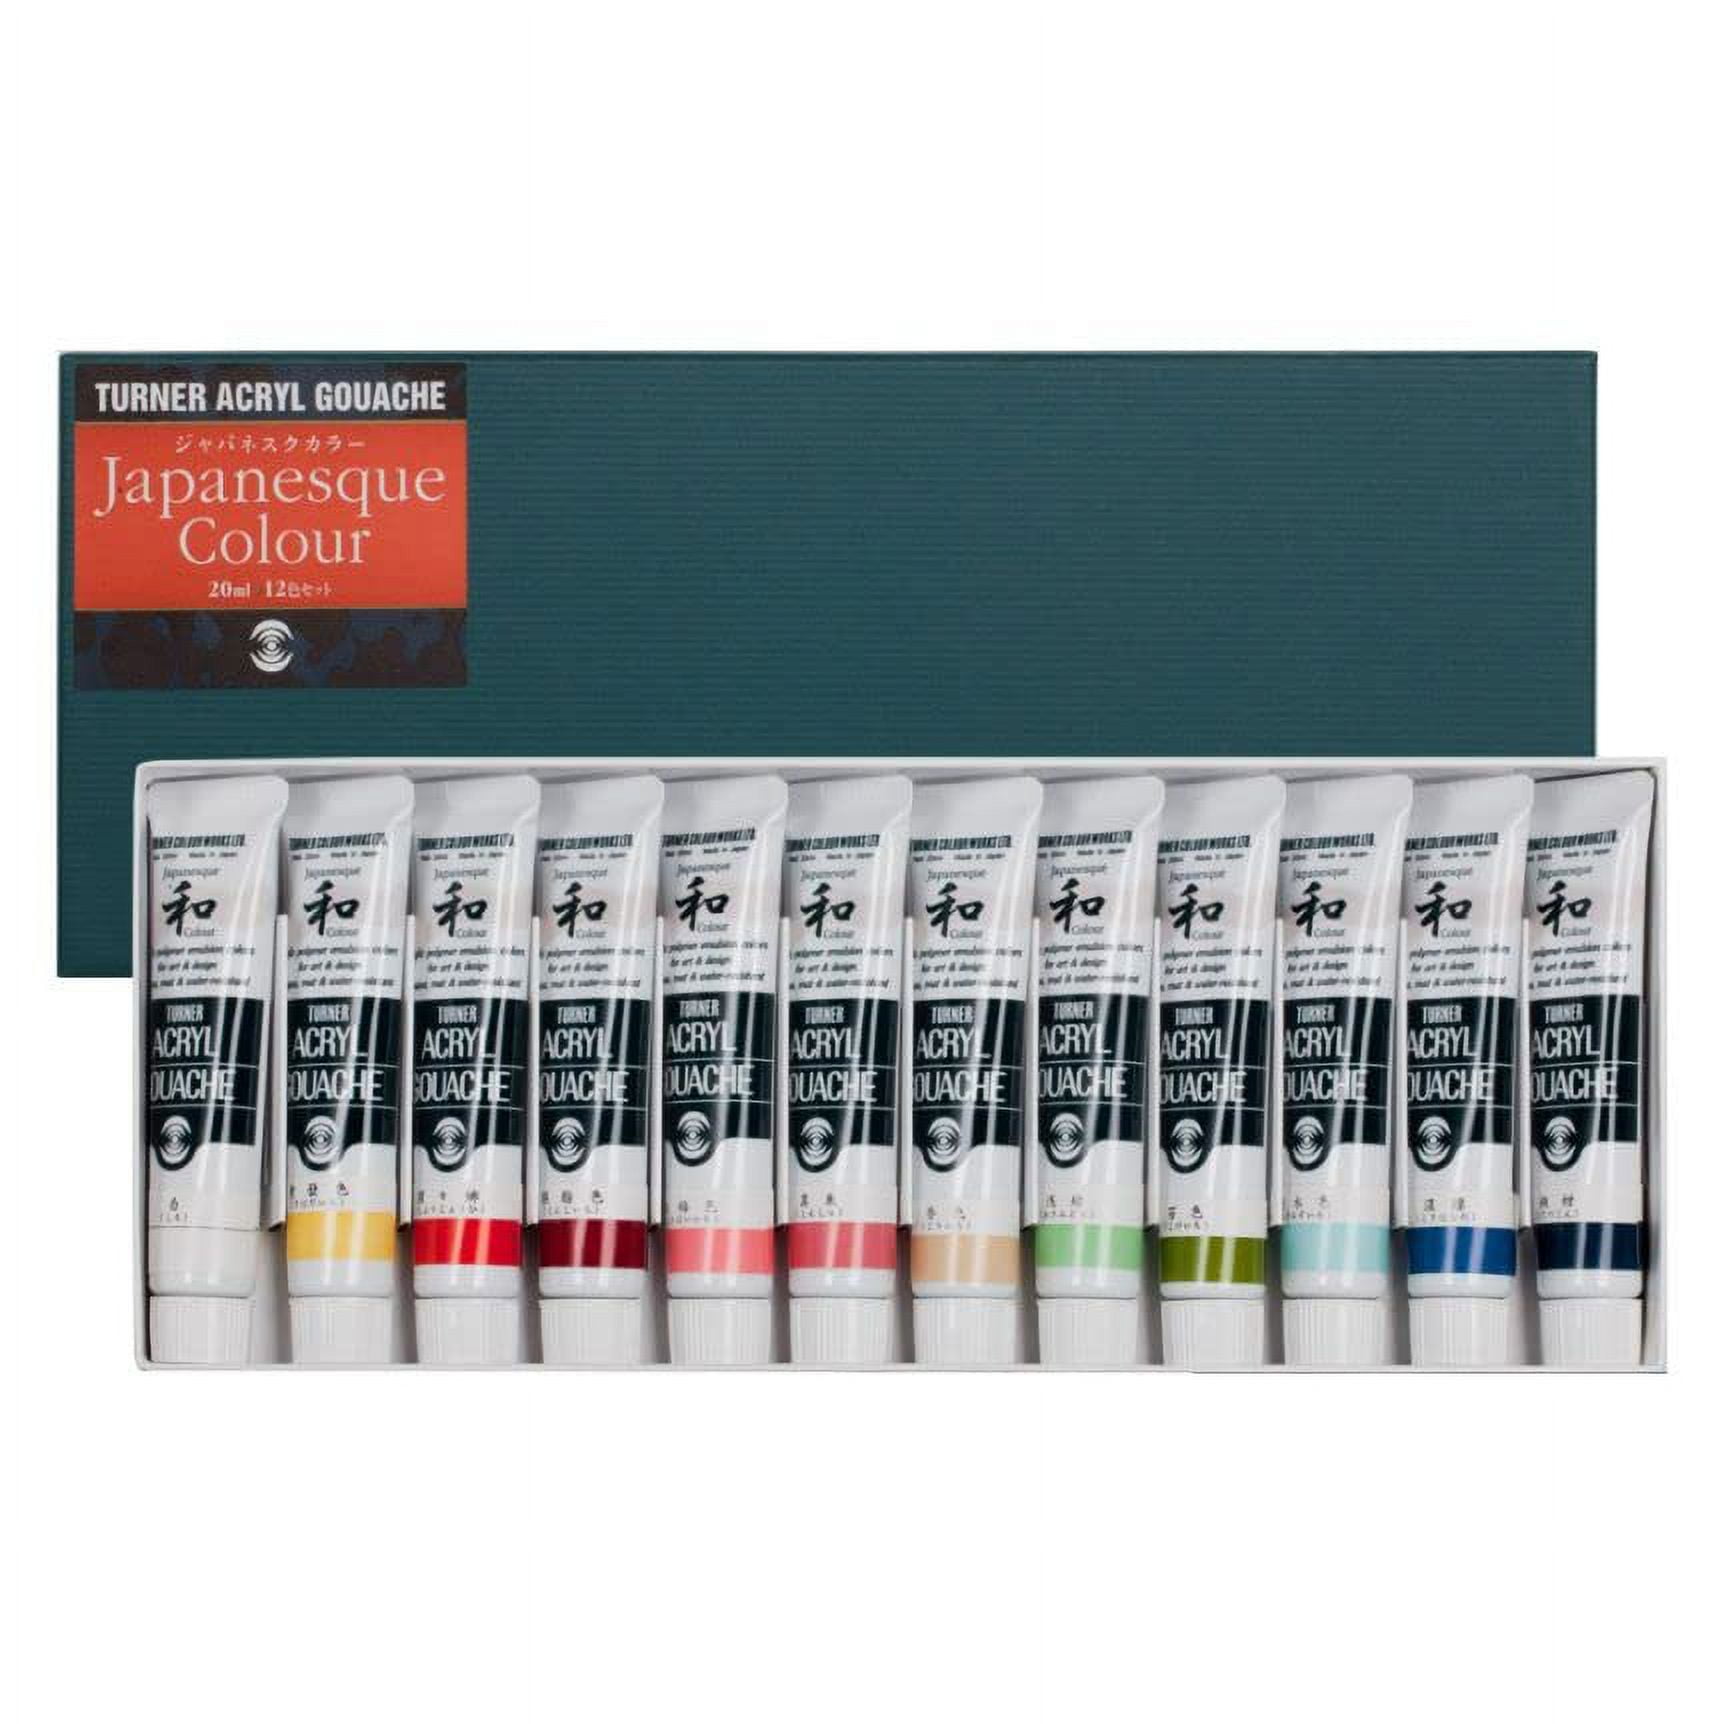 Swatching the Turner Acryl Gouache Japanesque 45 Colors Set 